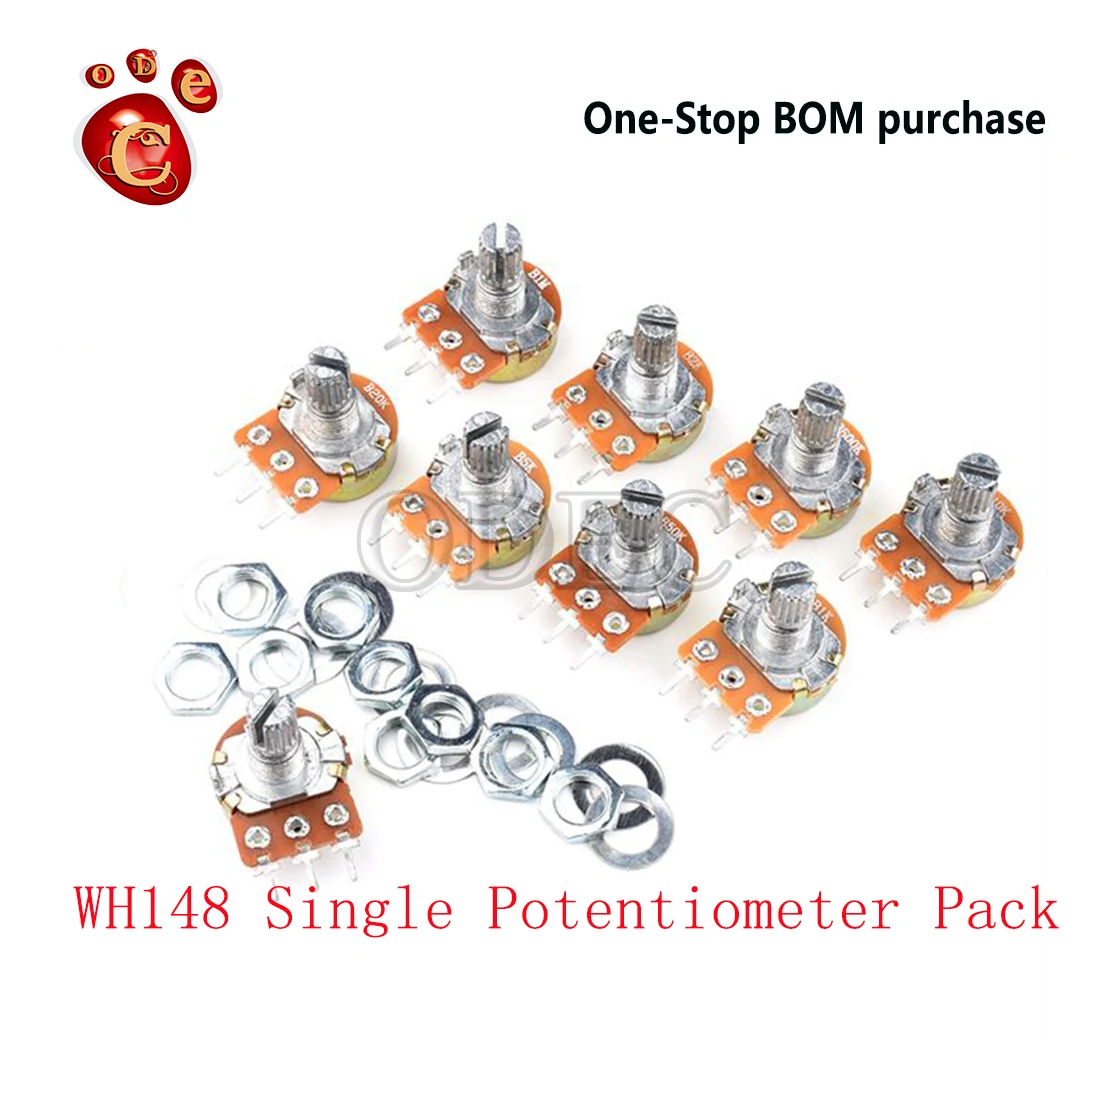 WH148 Single Potentiometer Pack Element Pack 9 Resistance Values B1/2/5/20/50K-1M 3 Pin Handle Length 15MM minisas hd to minisas hd l 1m single pack moq 1 90sk0000 mgzan0